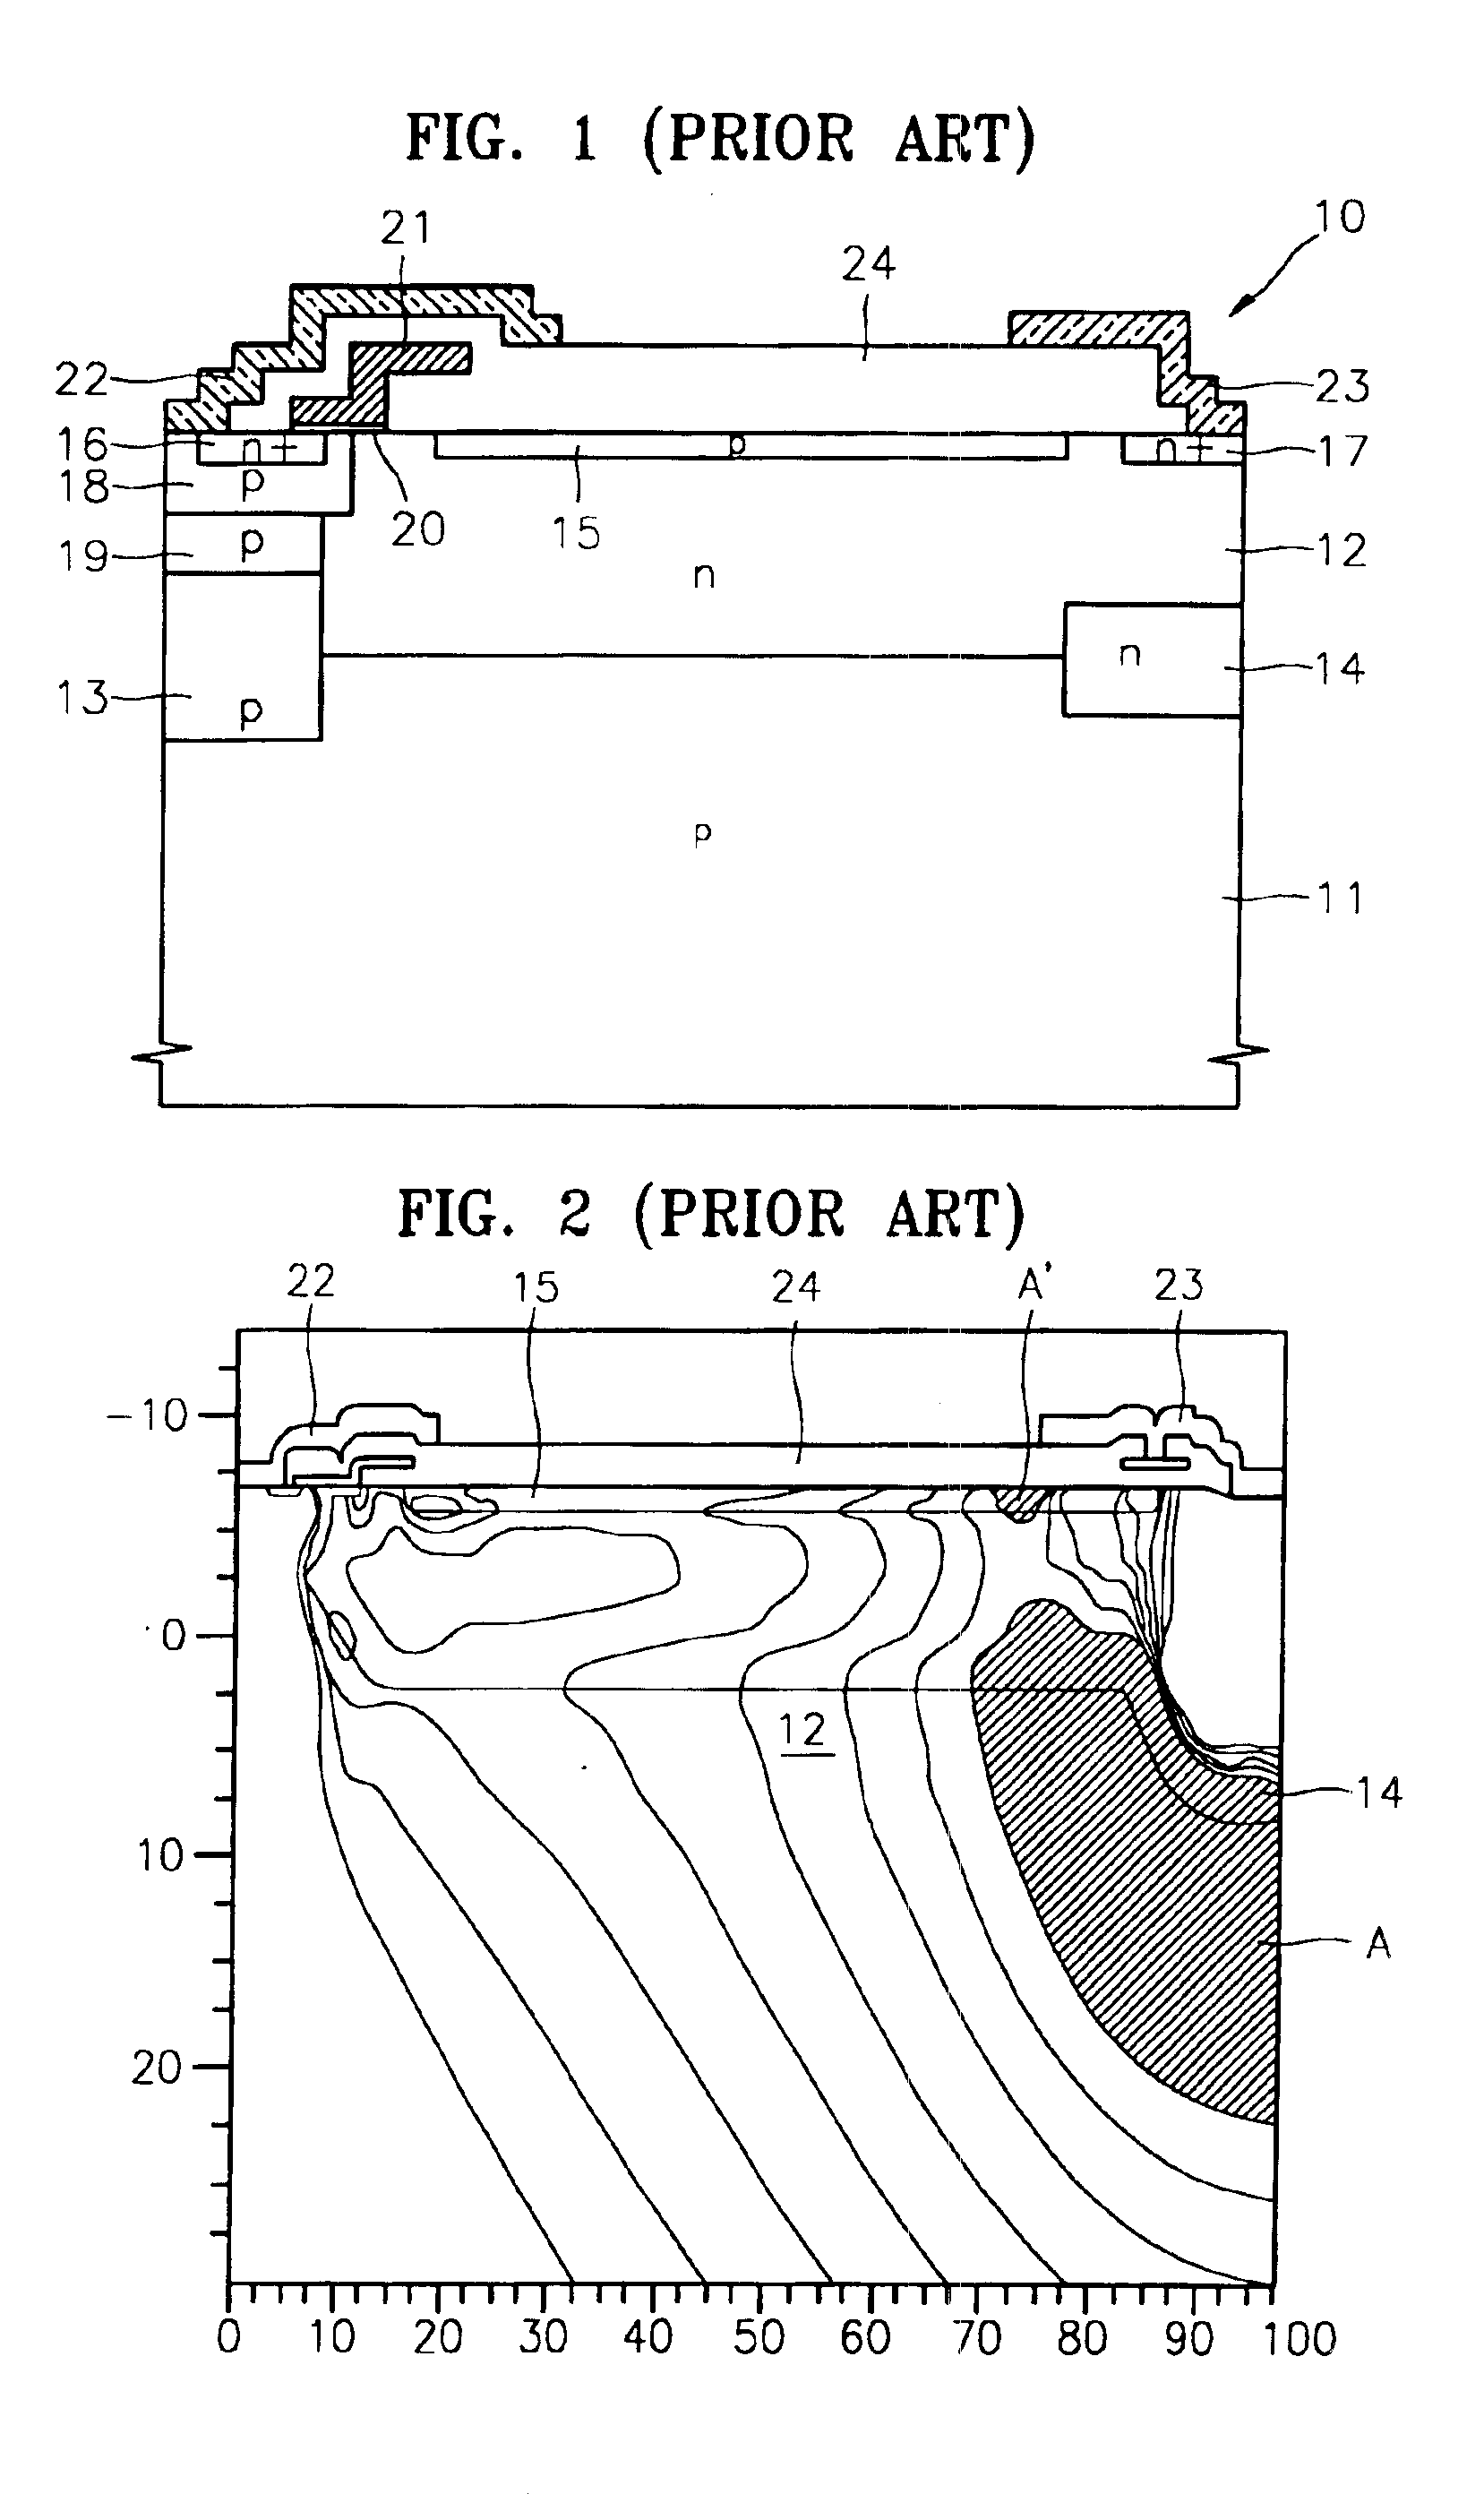 Lateral DMOS transistor having reduced surface field